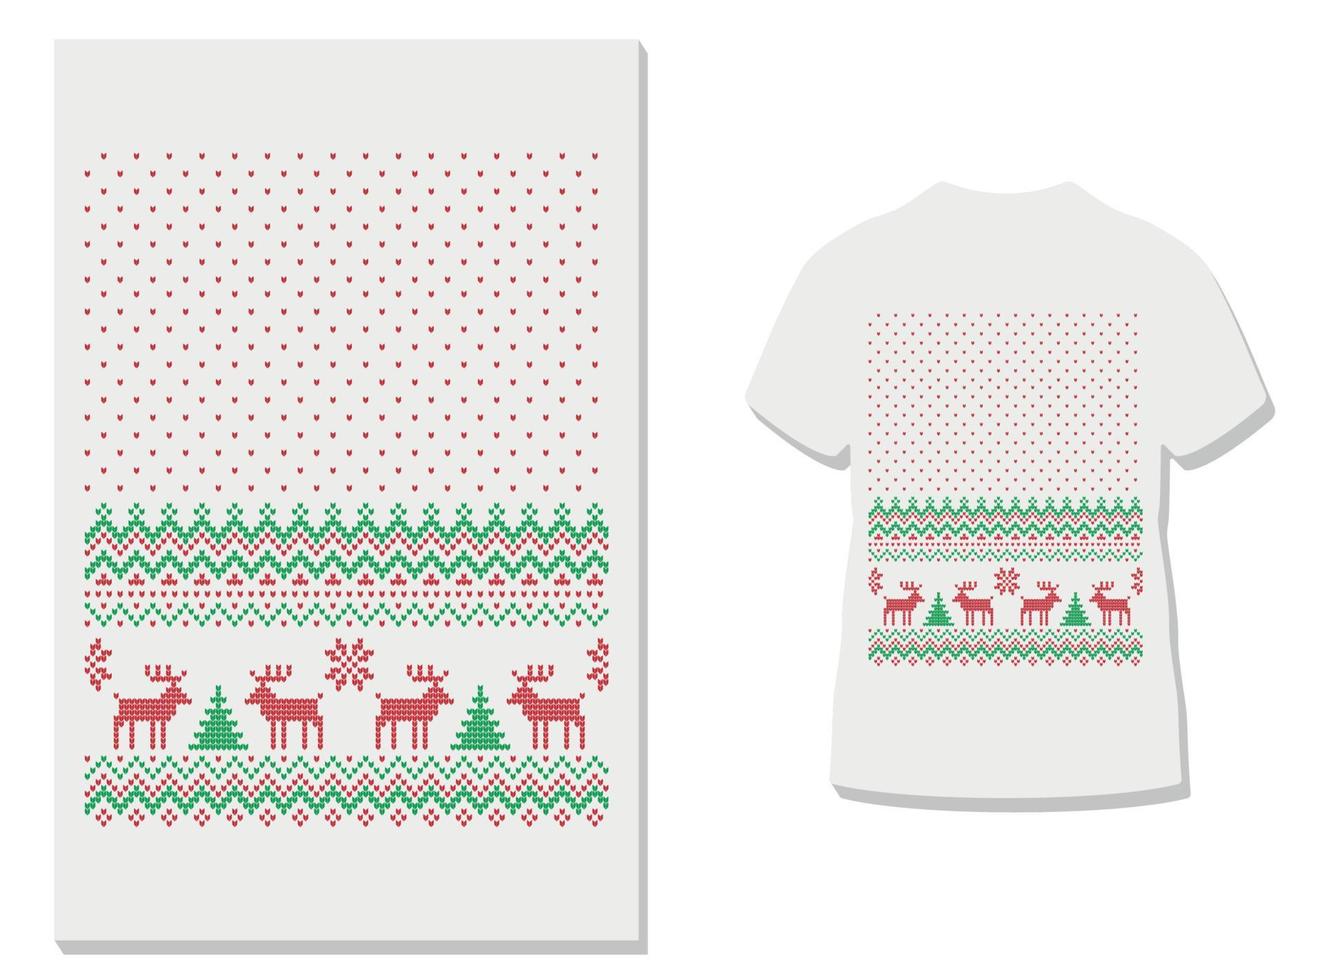 Marry Christmas t shirt designs template. Vector graphic typographic design for poster, label, badge, logo,bags, stickers, curtains, posters, bed covers, pillows.